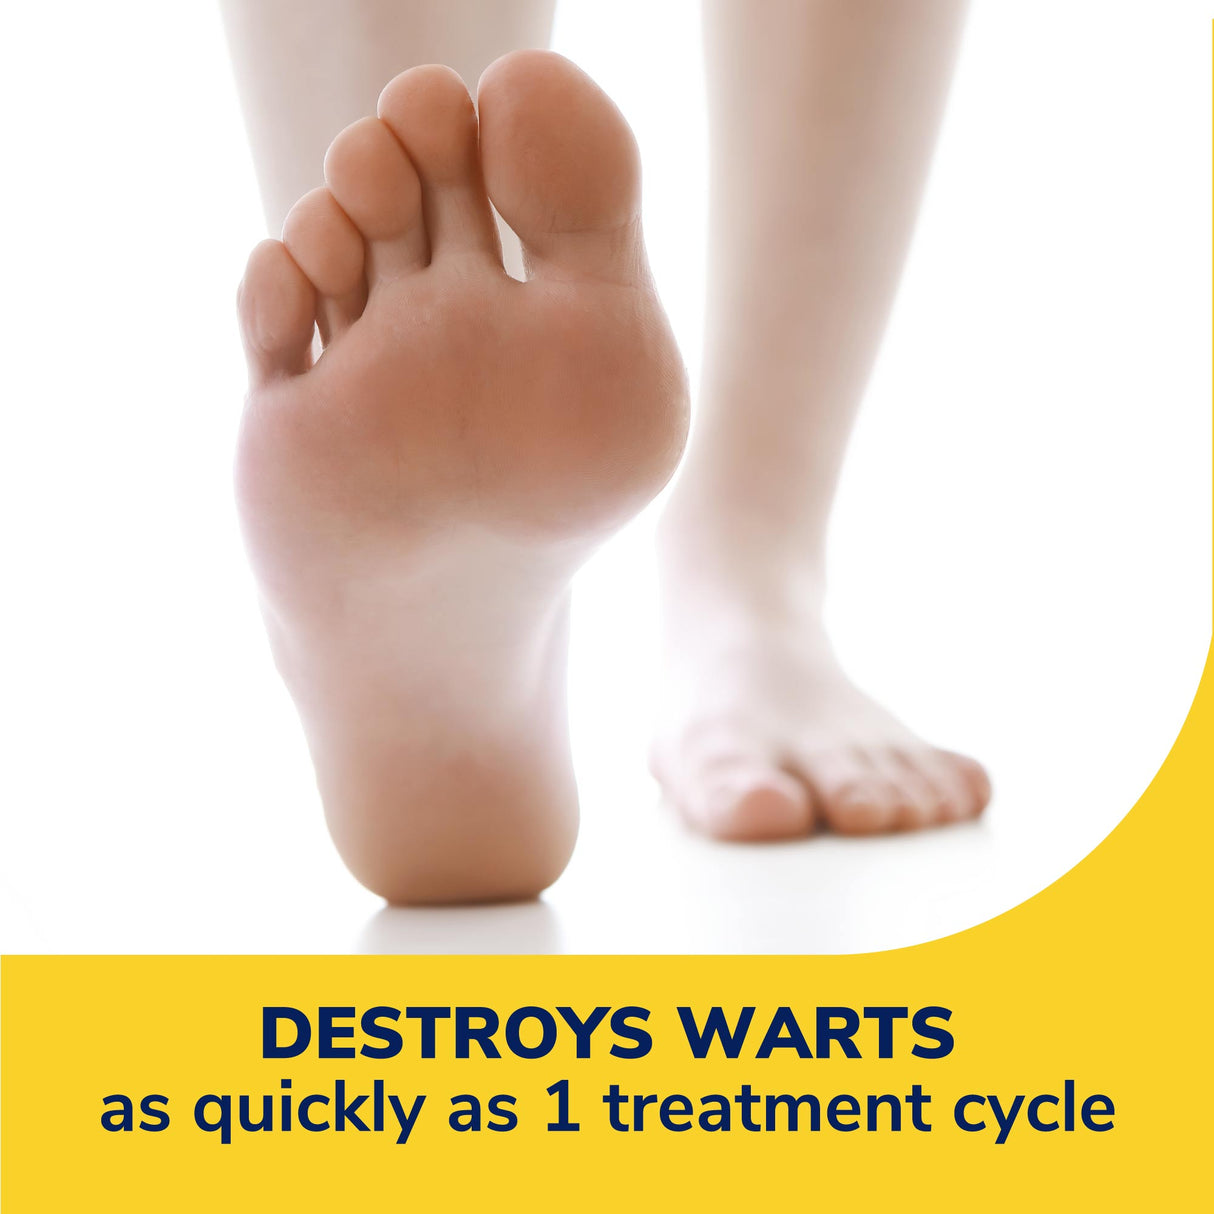 image of destroys warts as quickly as 1 treatment cycle